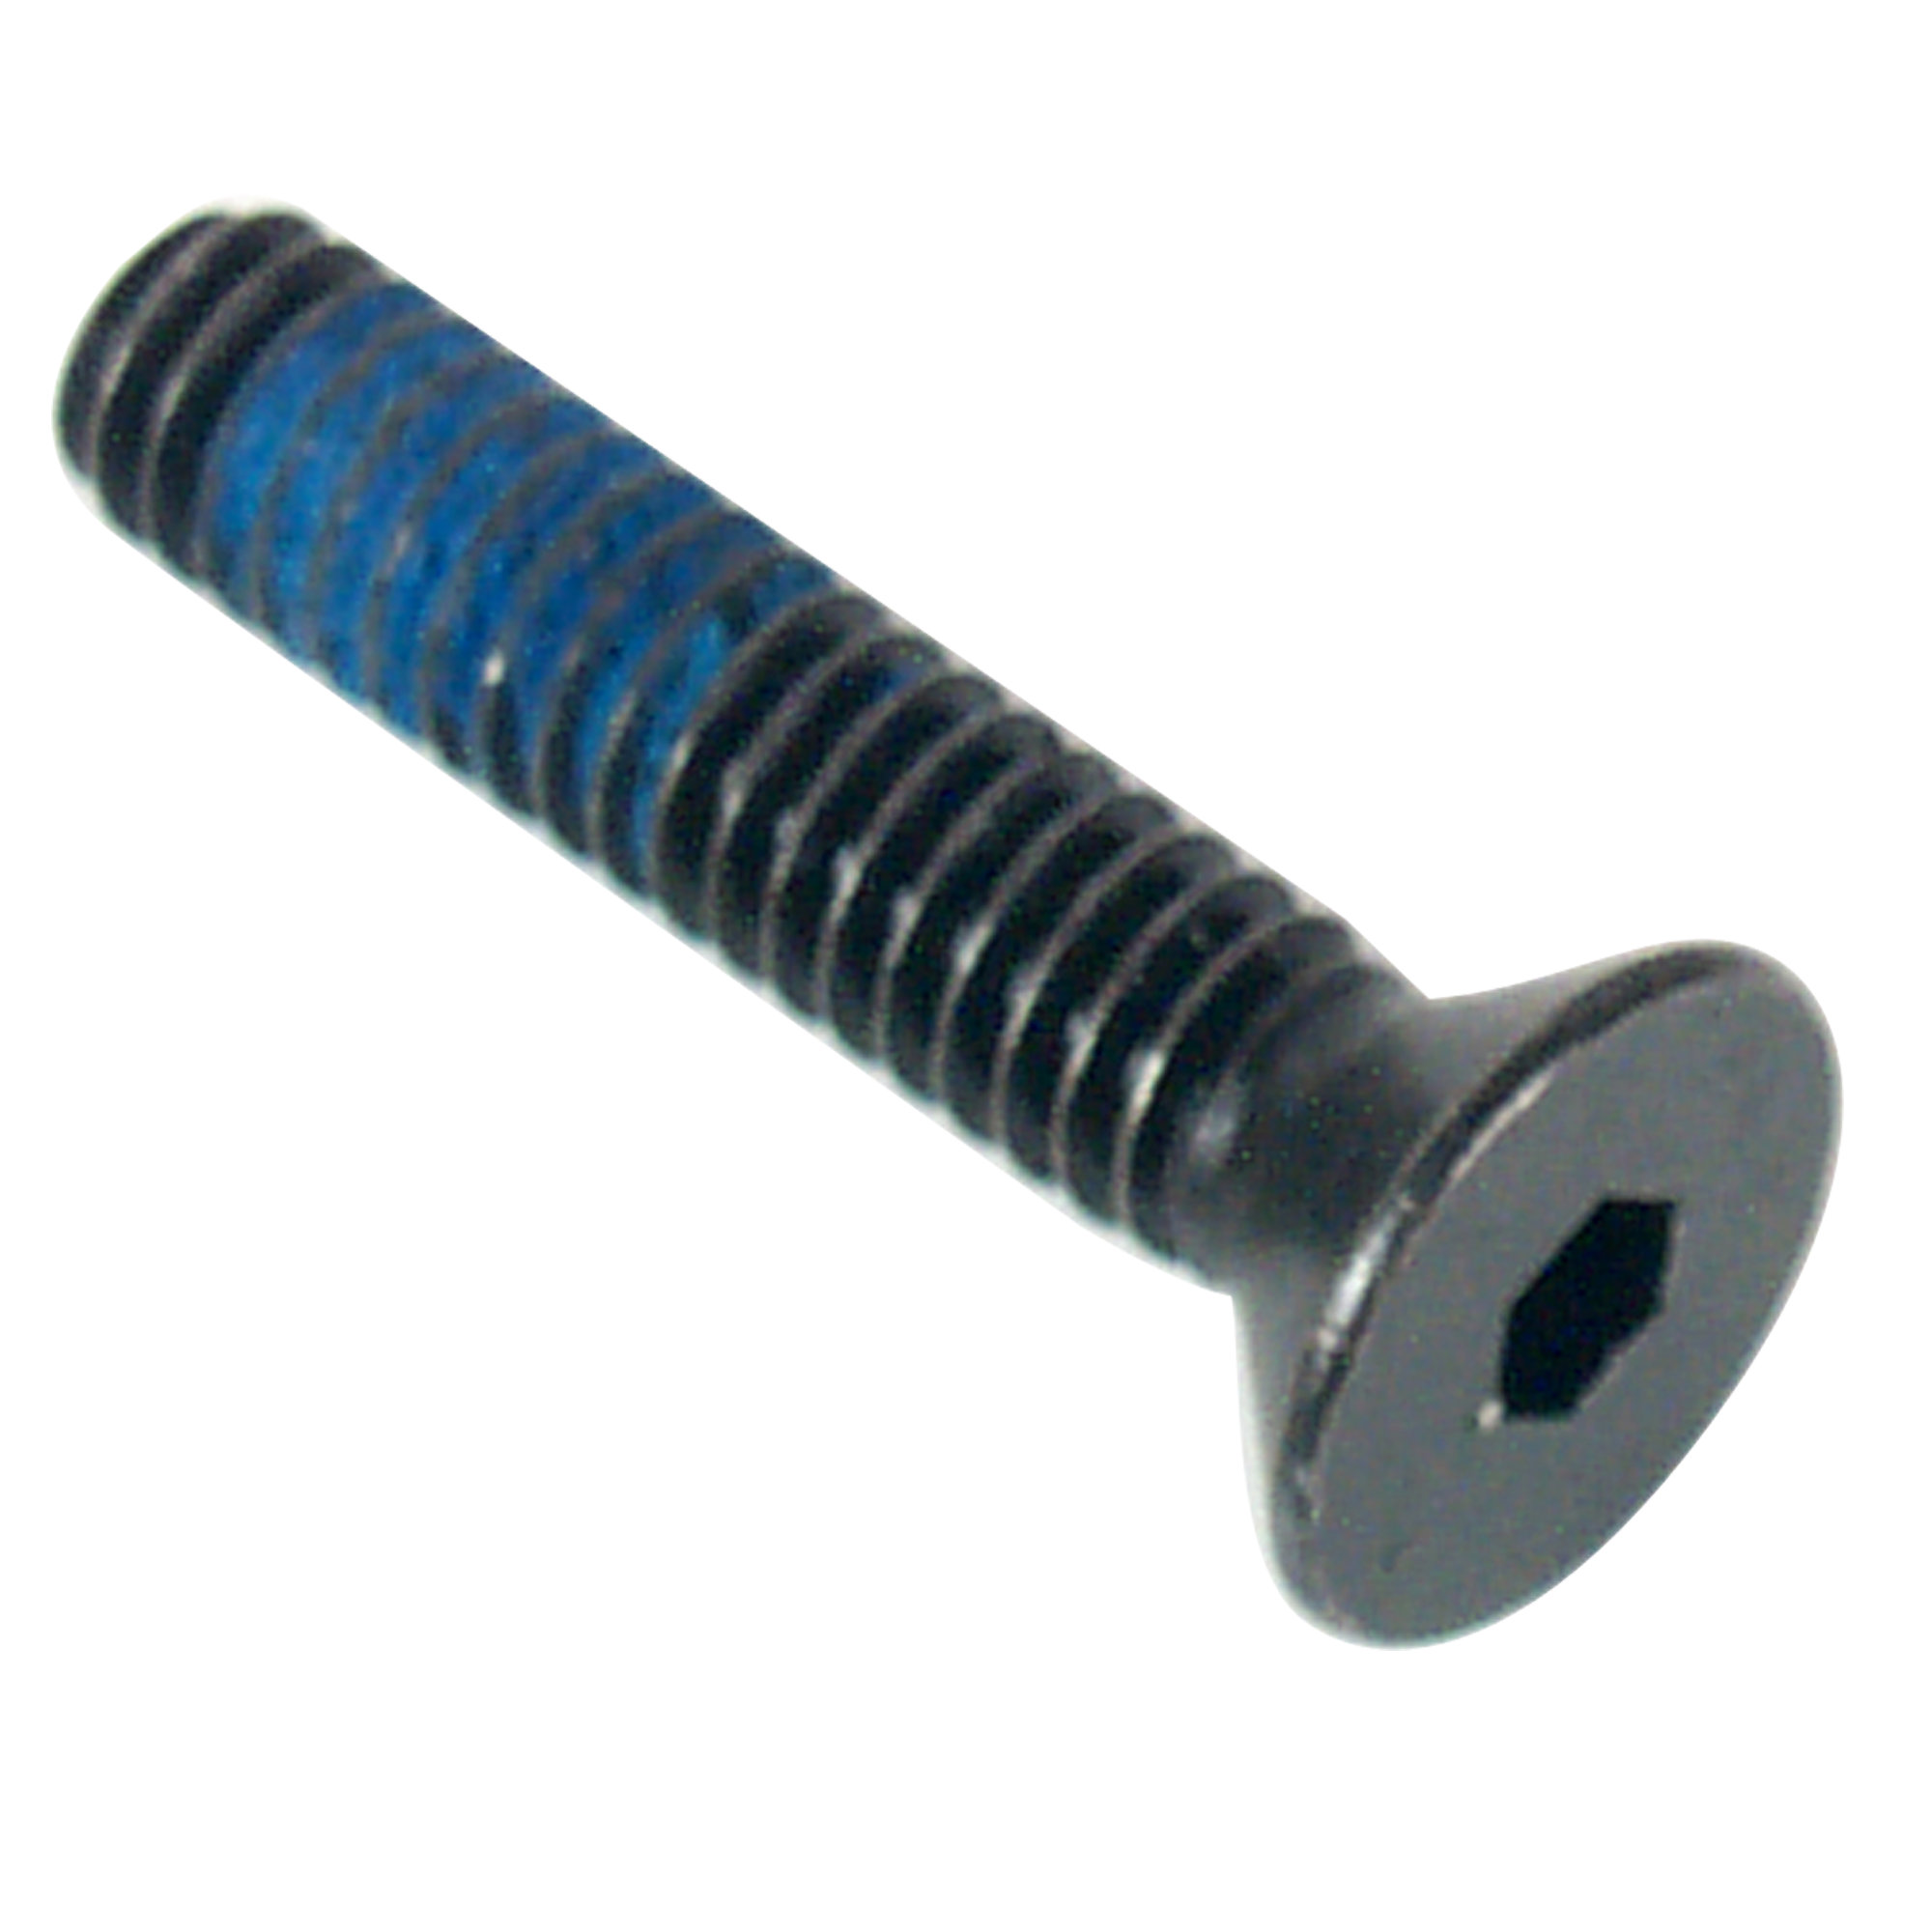 Screw with Thread Lock Patch for LifeFitness Deck